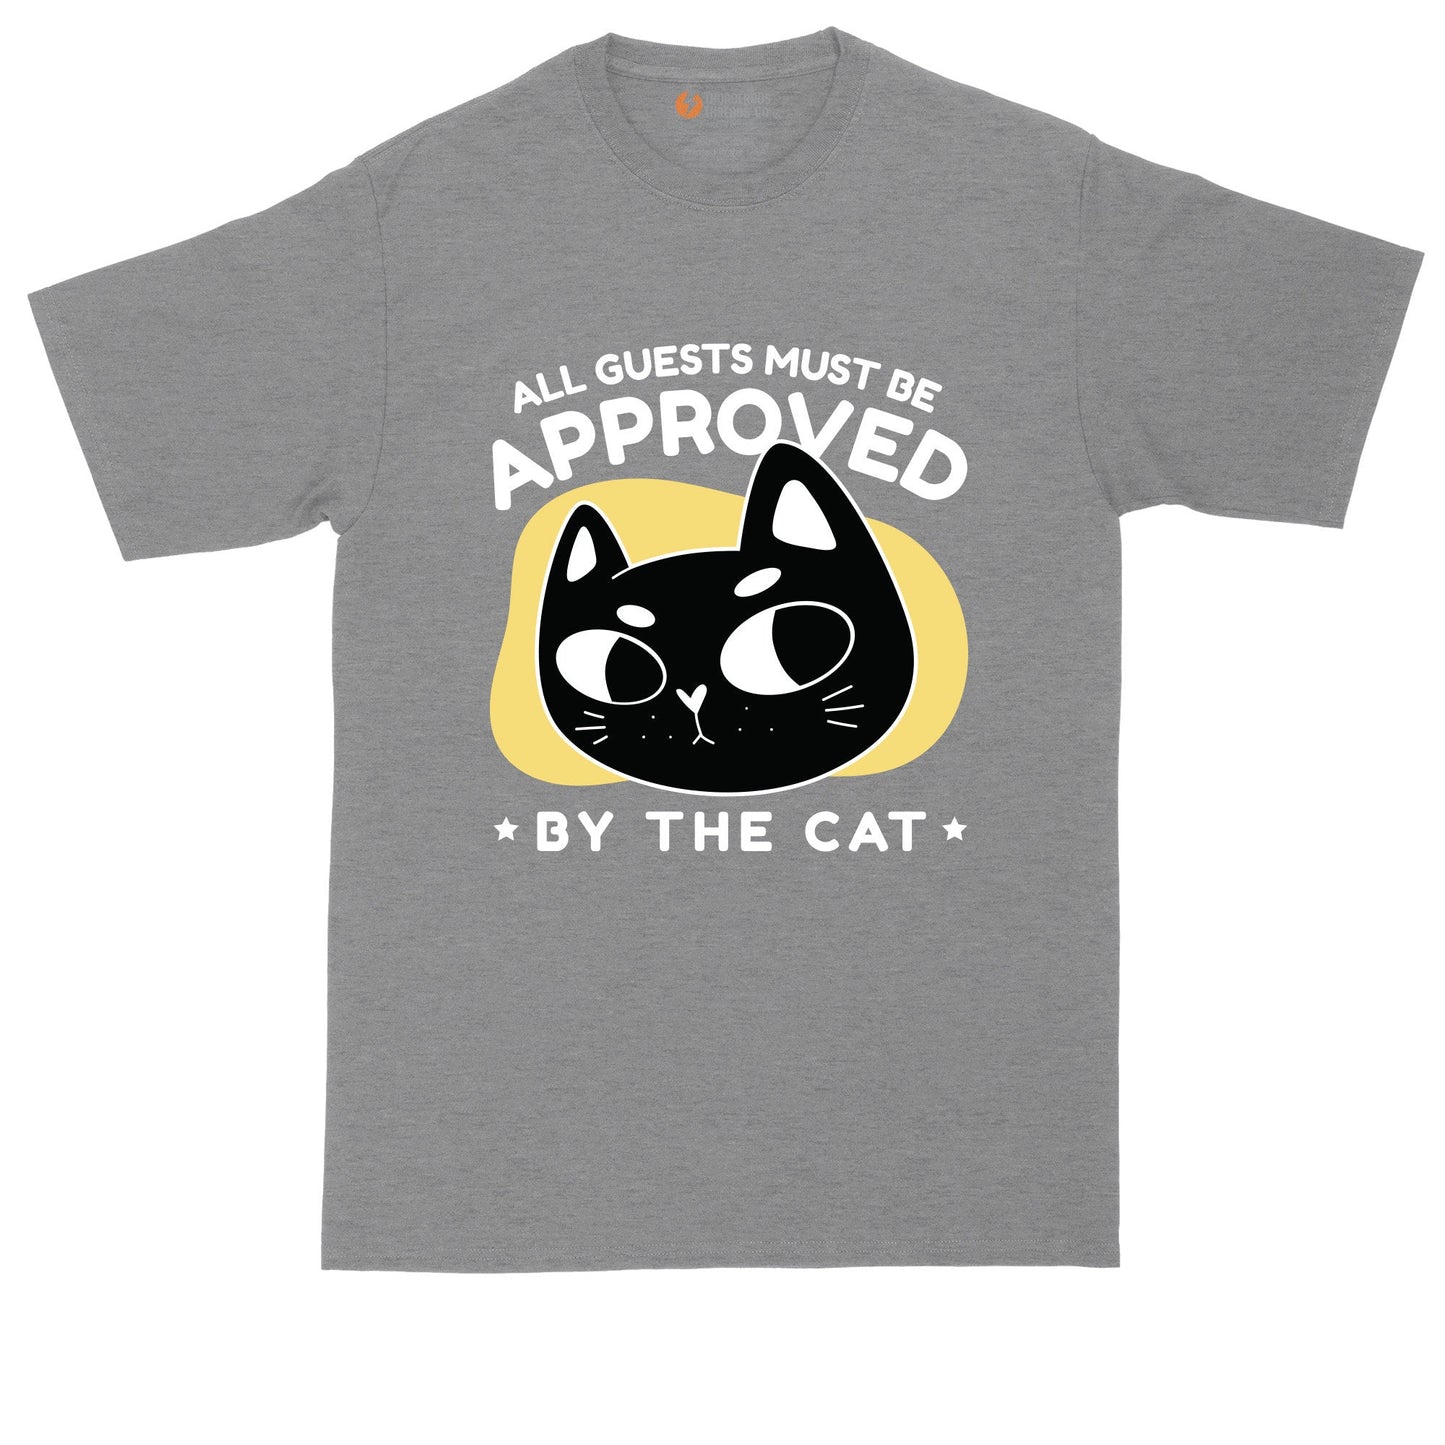 All Guests Must Be Approved by the Cat | Mens Big & Tall T-Shirt